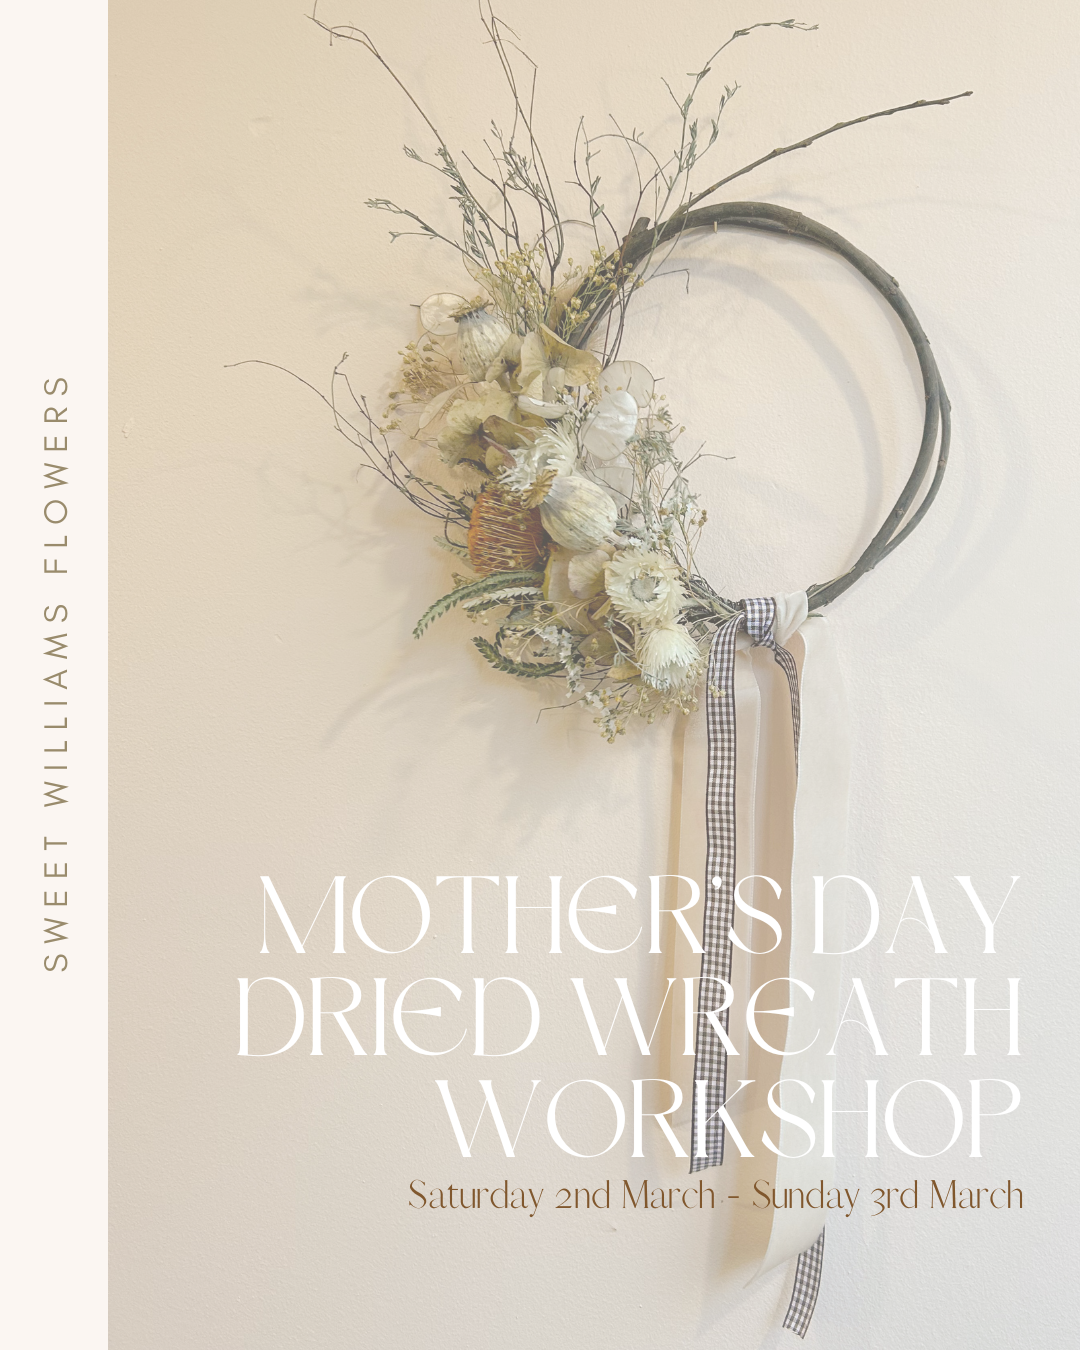 Mother's Day Dried Wreath Workshop